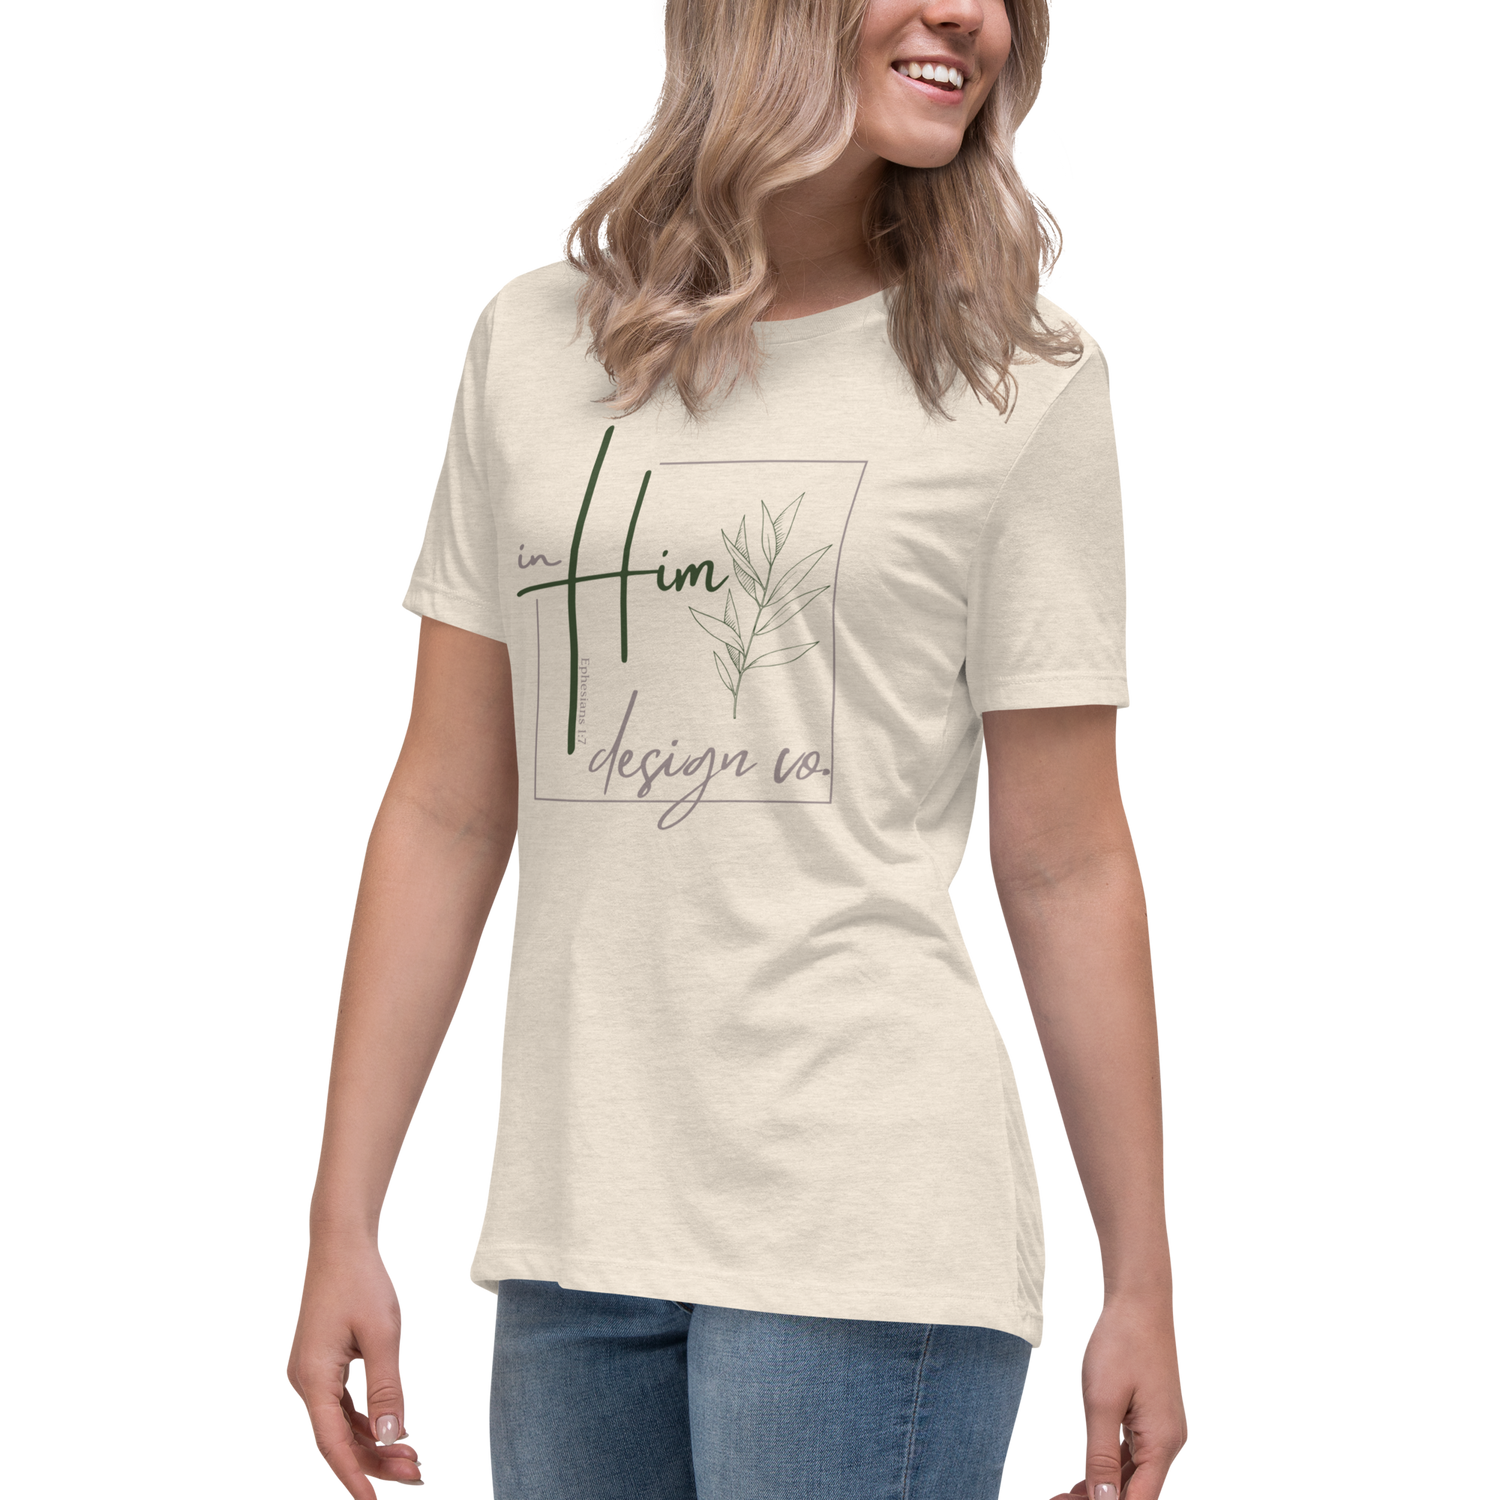 In Him Collection - Women's apparel 